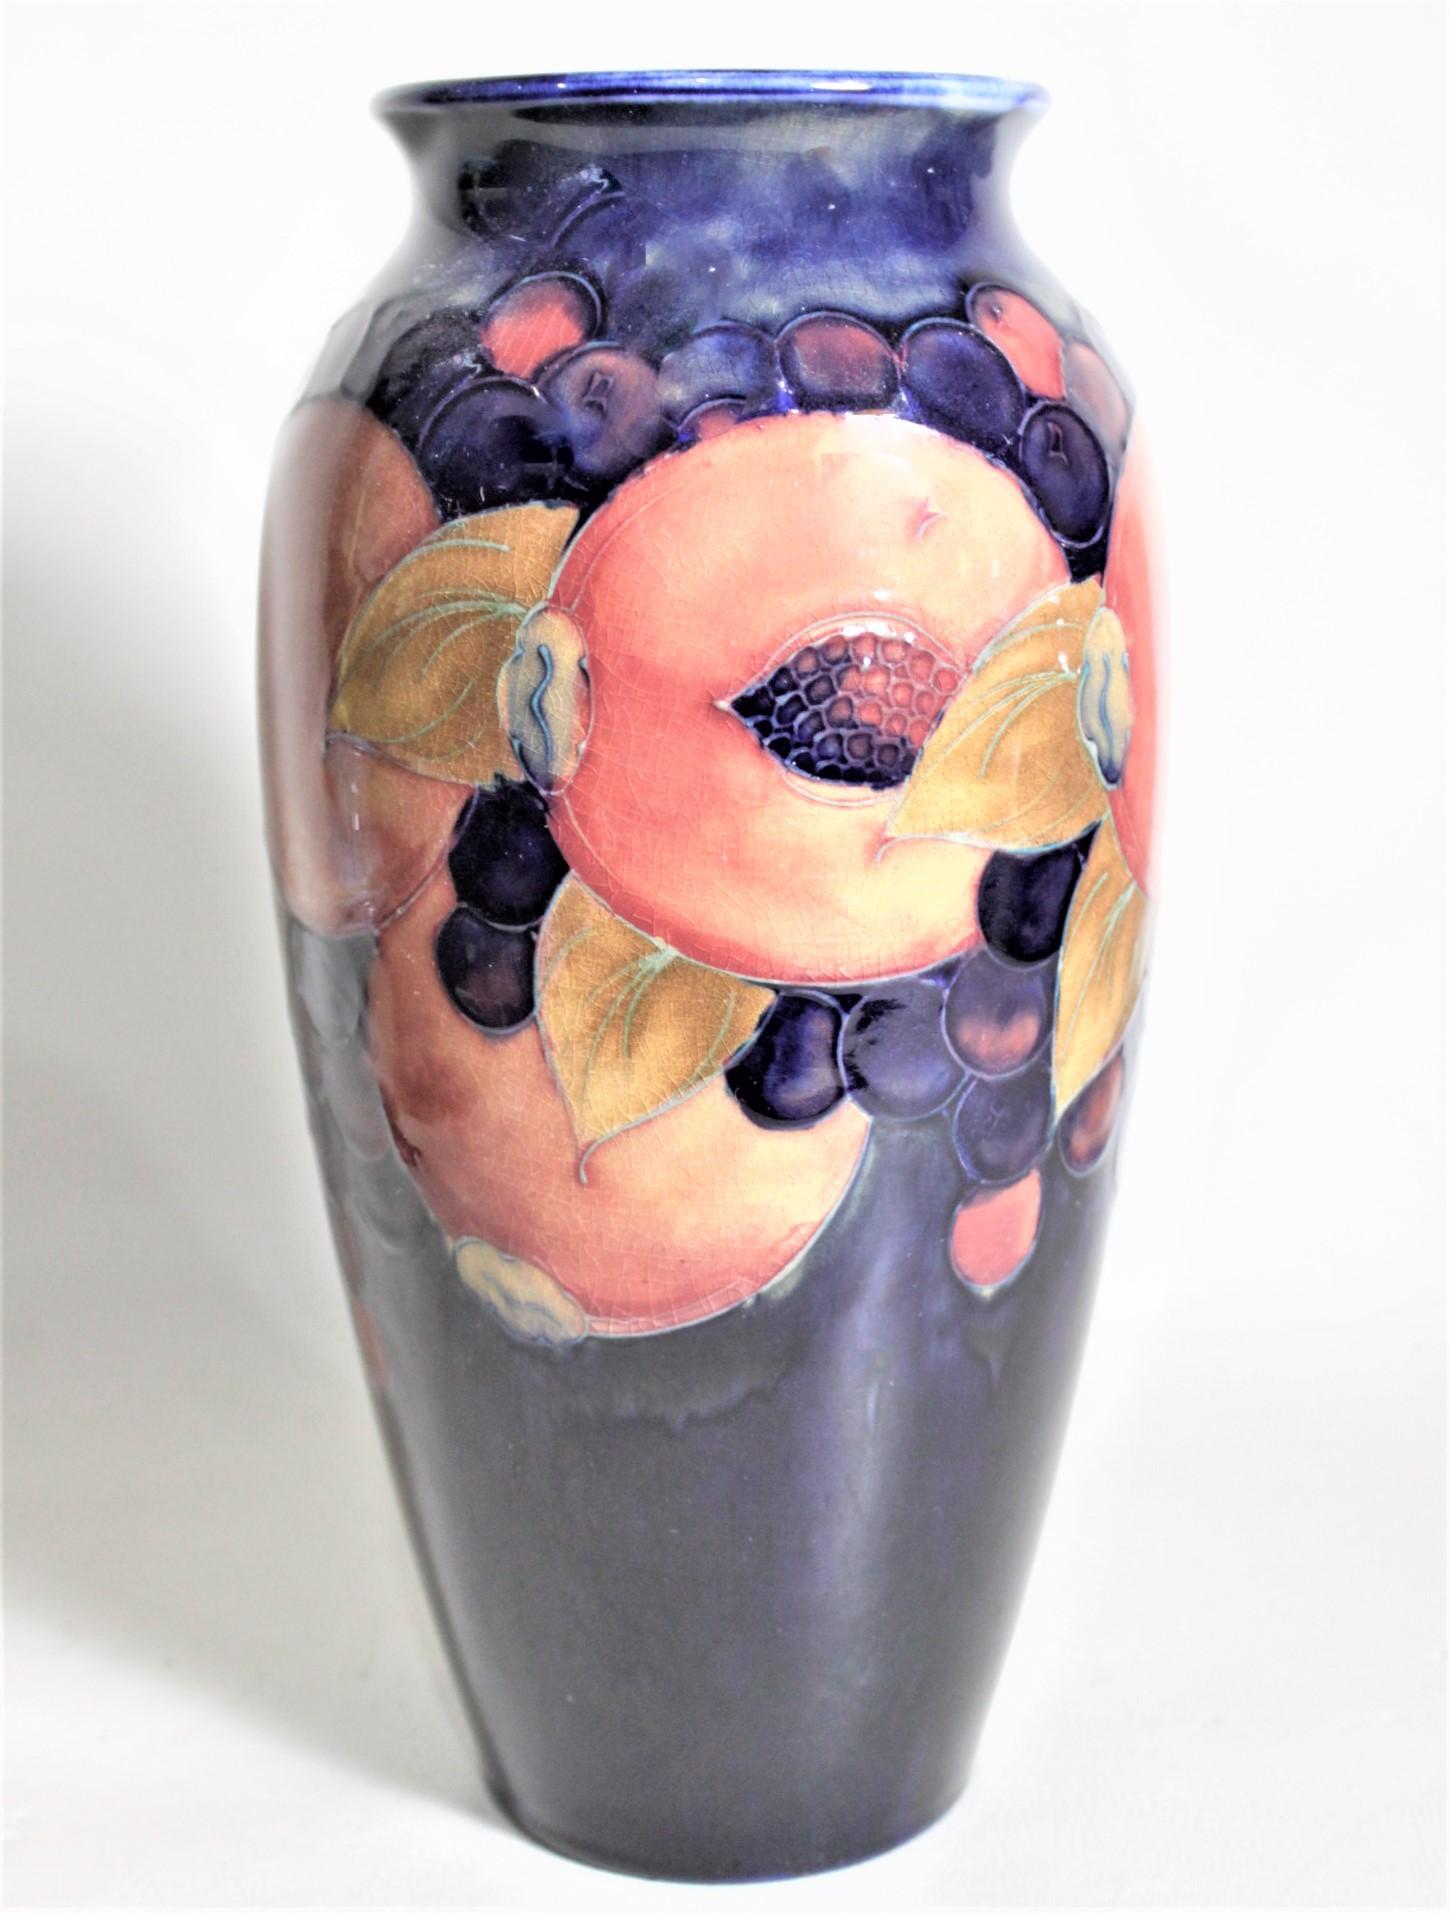 This art pottery vase was done by the Moorcroft Pottery company of England in circa 1939 using their signature deep cobalt blue ground and done in the 'Pomegranate' pattern. The vase is clearly signed on the base with impressed maker's marks, and